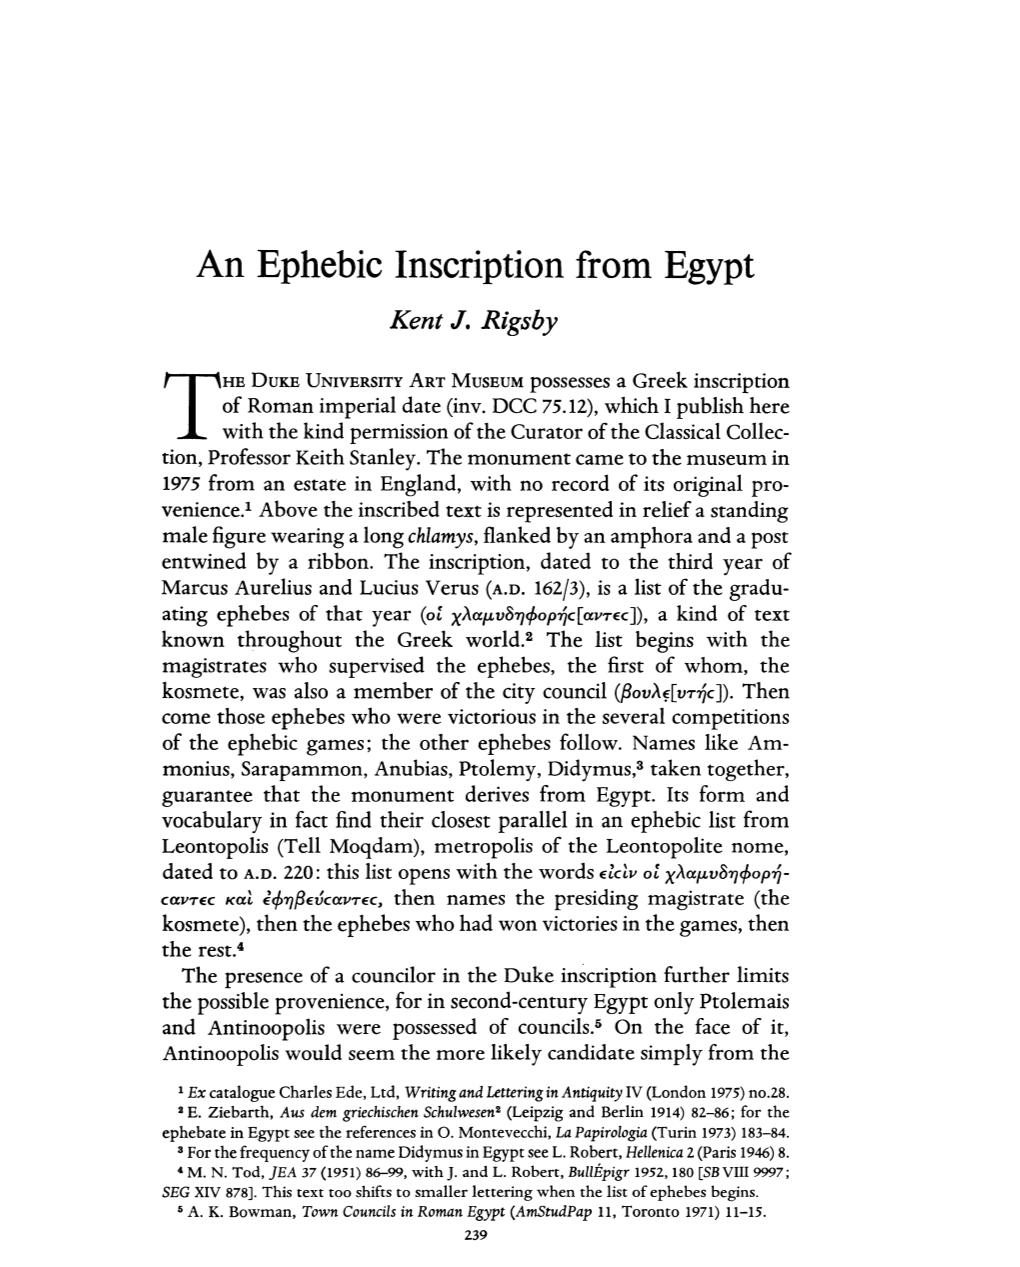 An Ephebic Inscription from Egypt Rigsby, Kent J Greek, Roman and Byzantine Studies; Jan 1, 1978; 19, 3; Periodicals Archive Online Pg